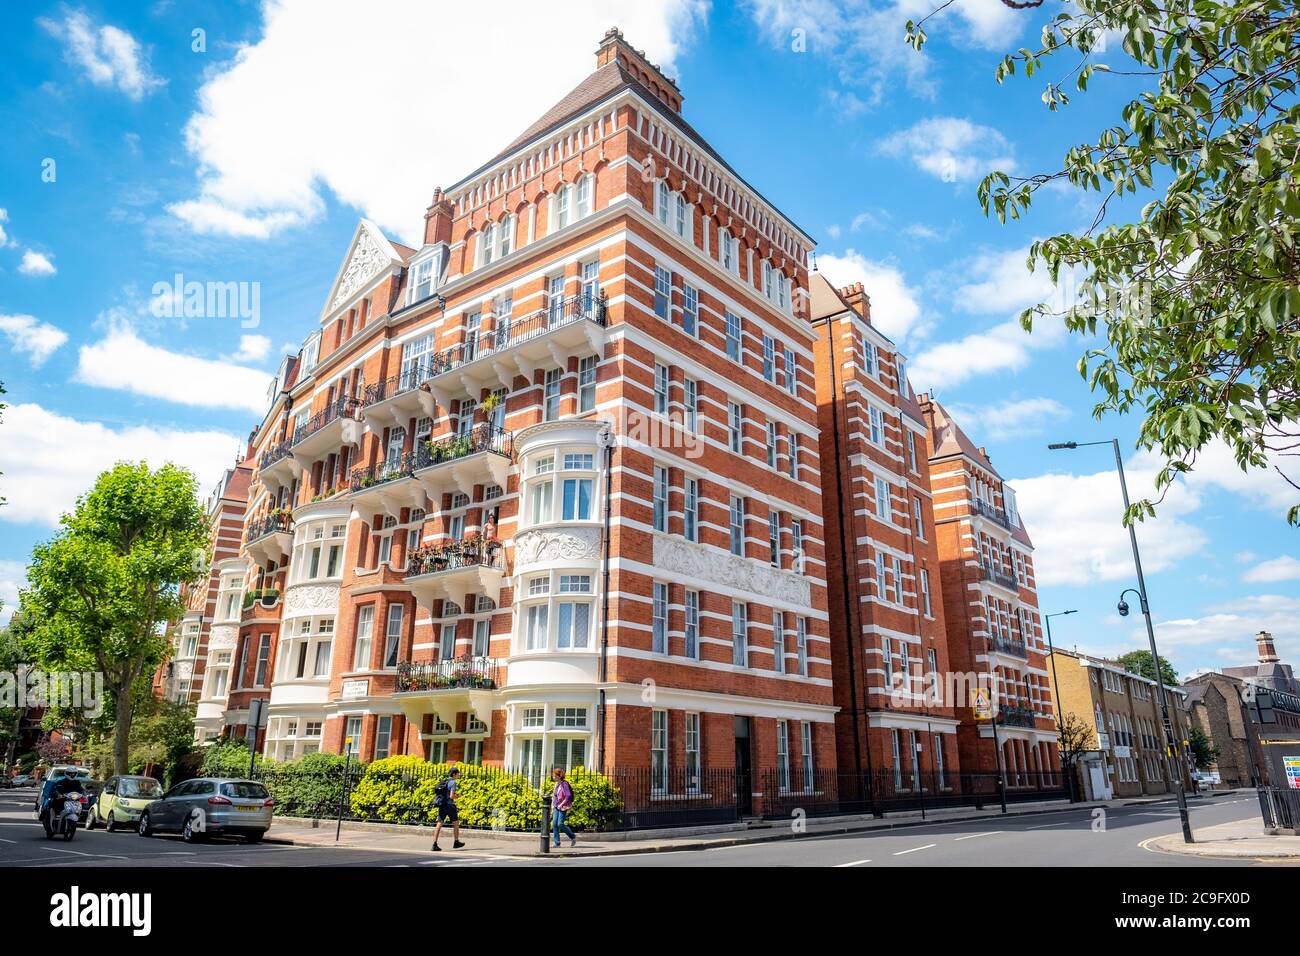 London- July, 2020: Typical red brick mansion building on North End Road in West Kensington Stock Photo